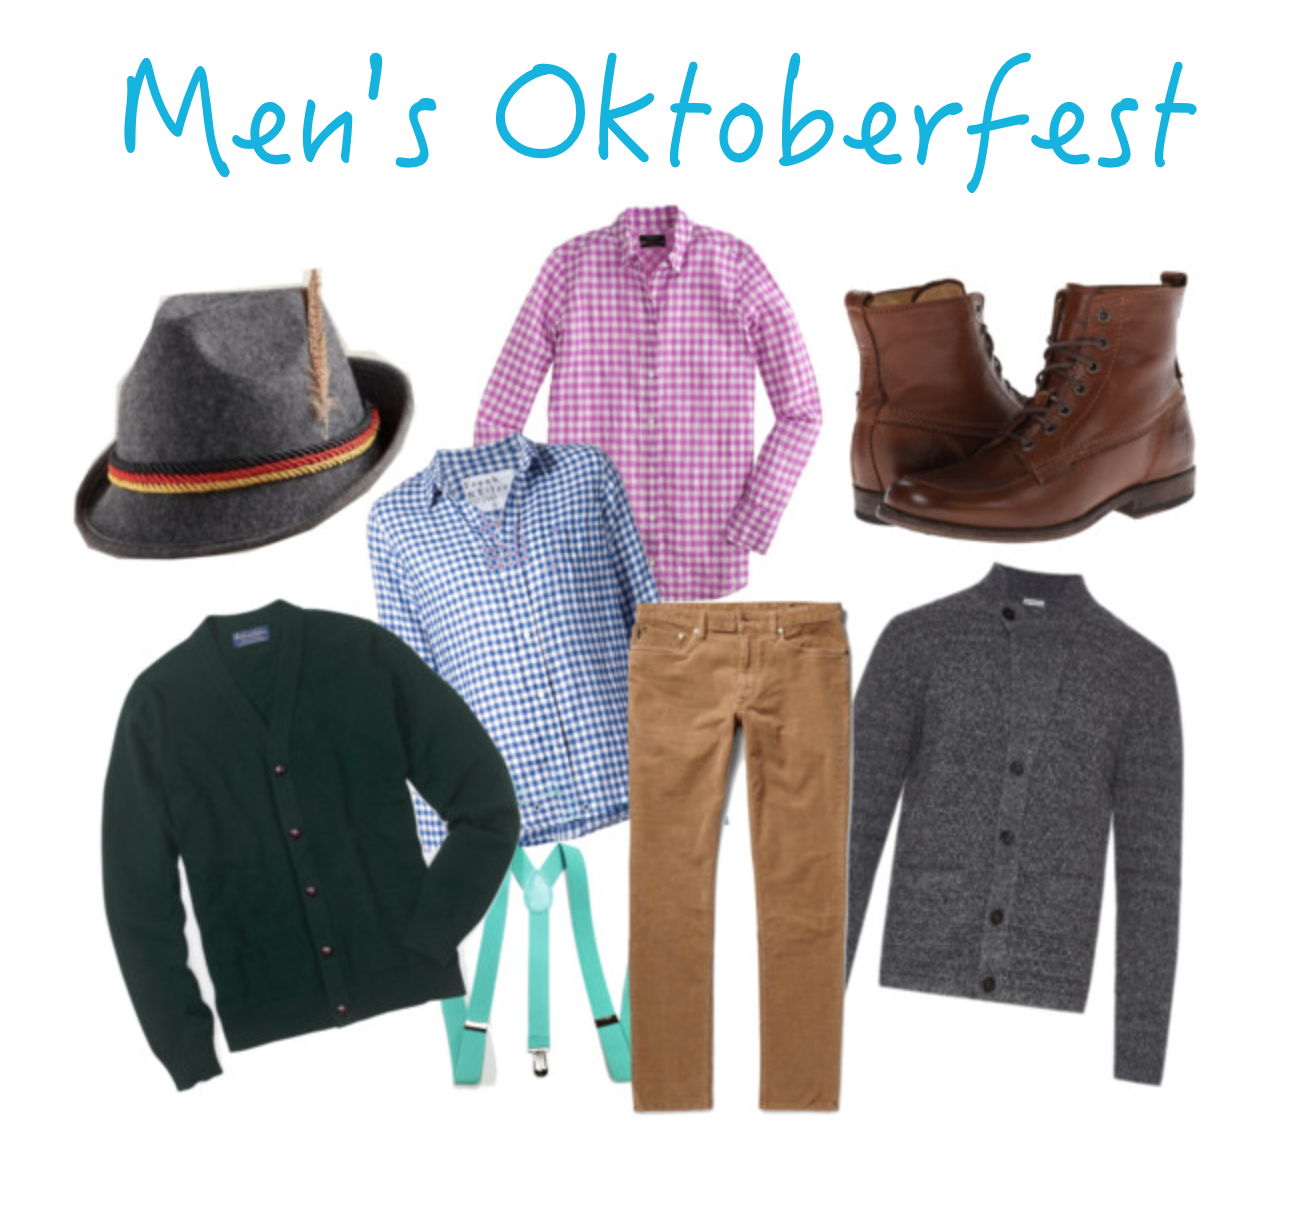 Men's outfits for the oktoberfest